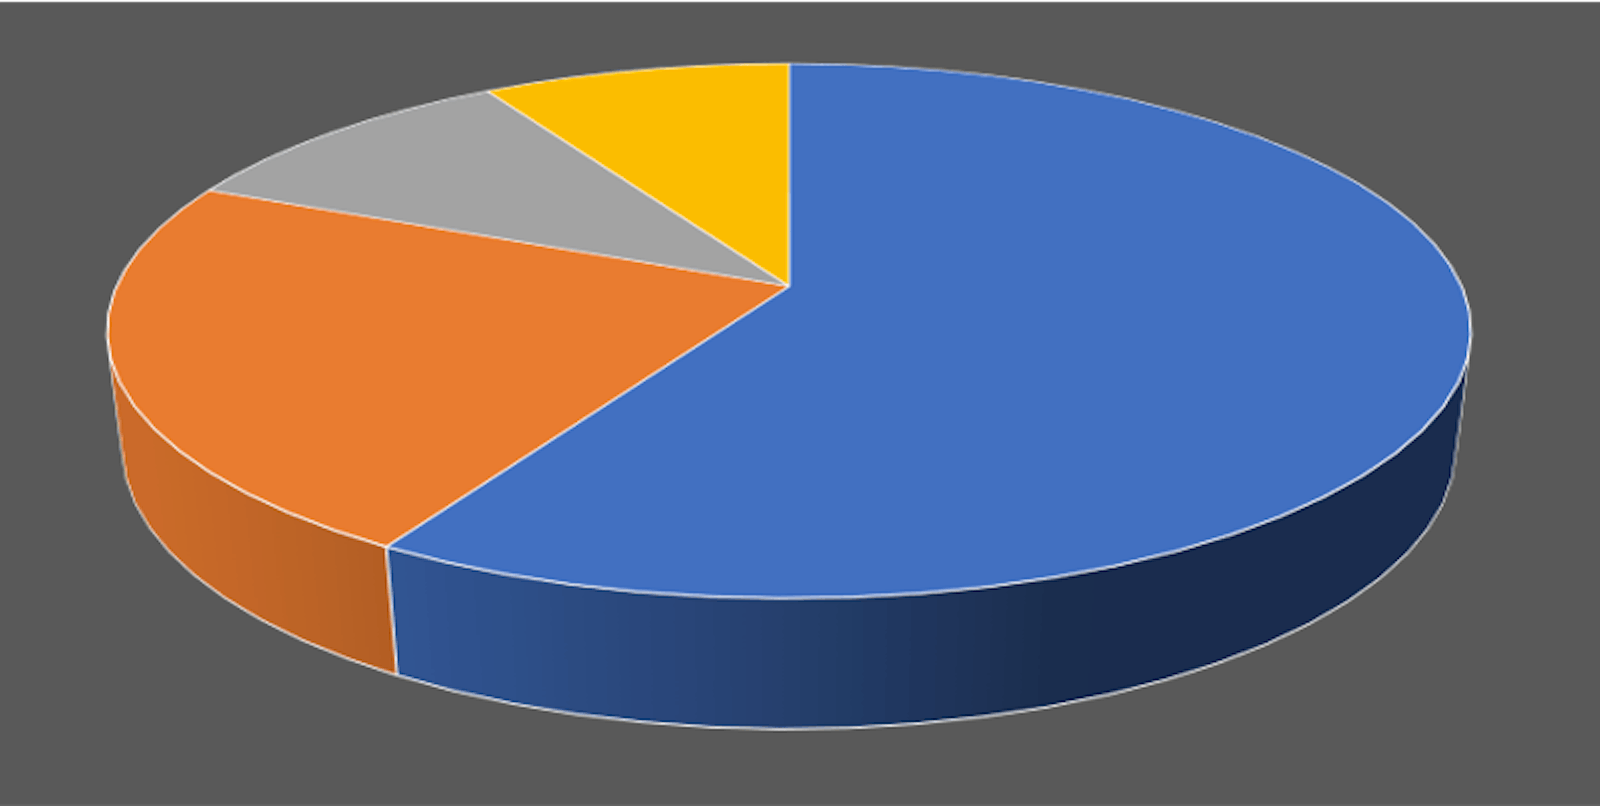 Build a simple Pie Chart with HTML and CSS